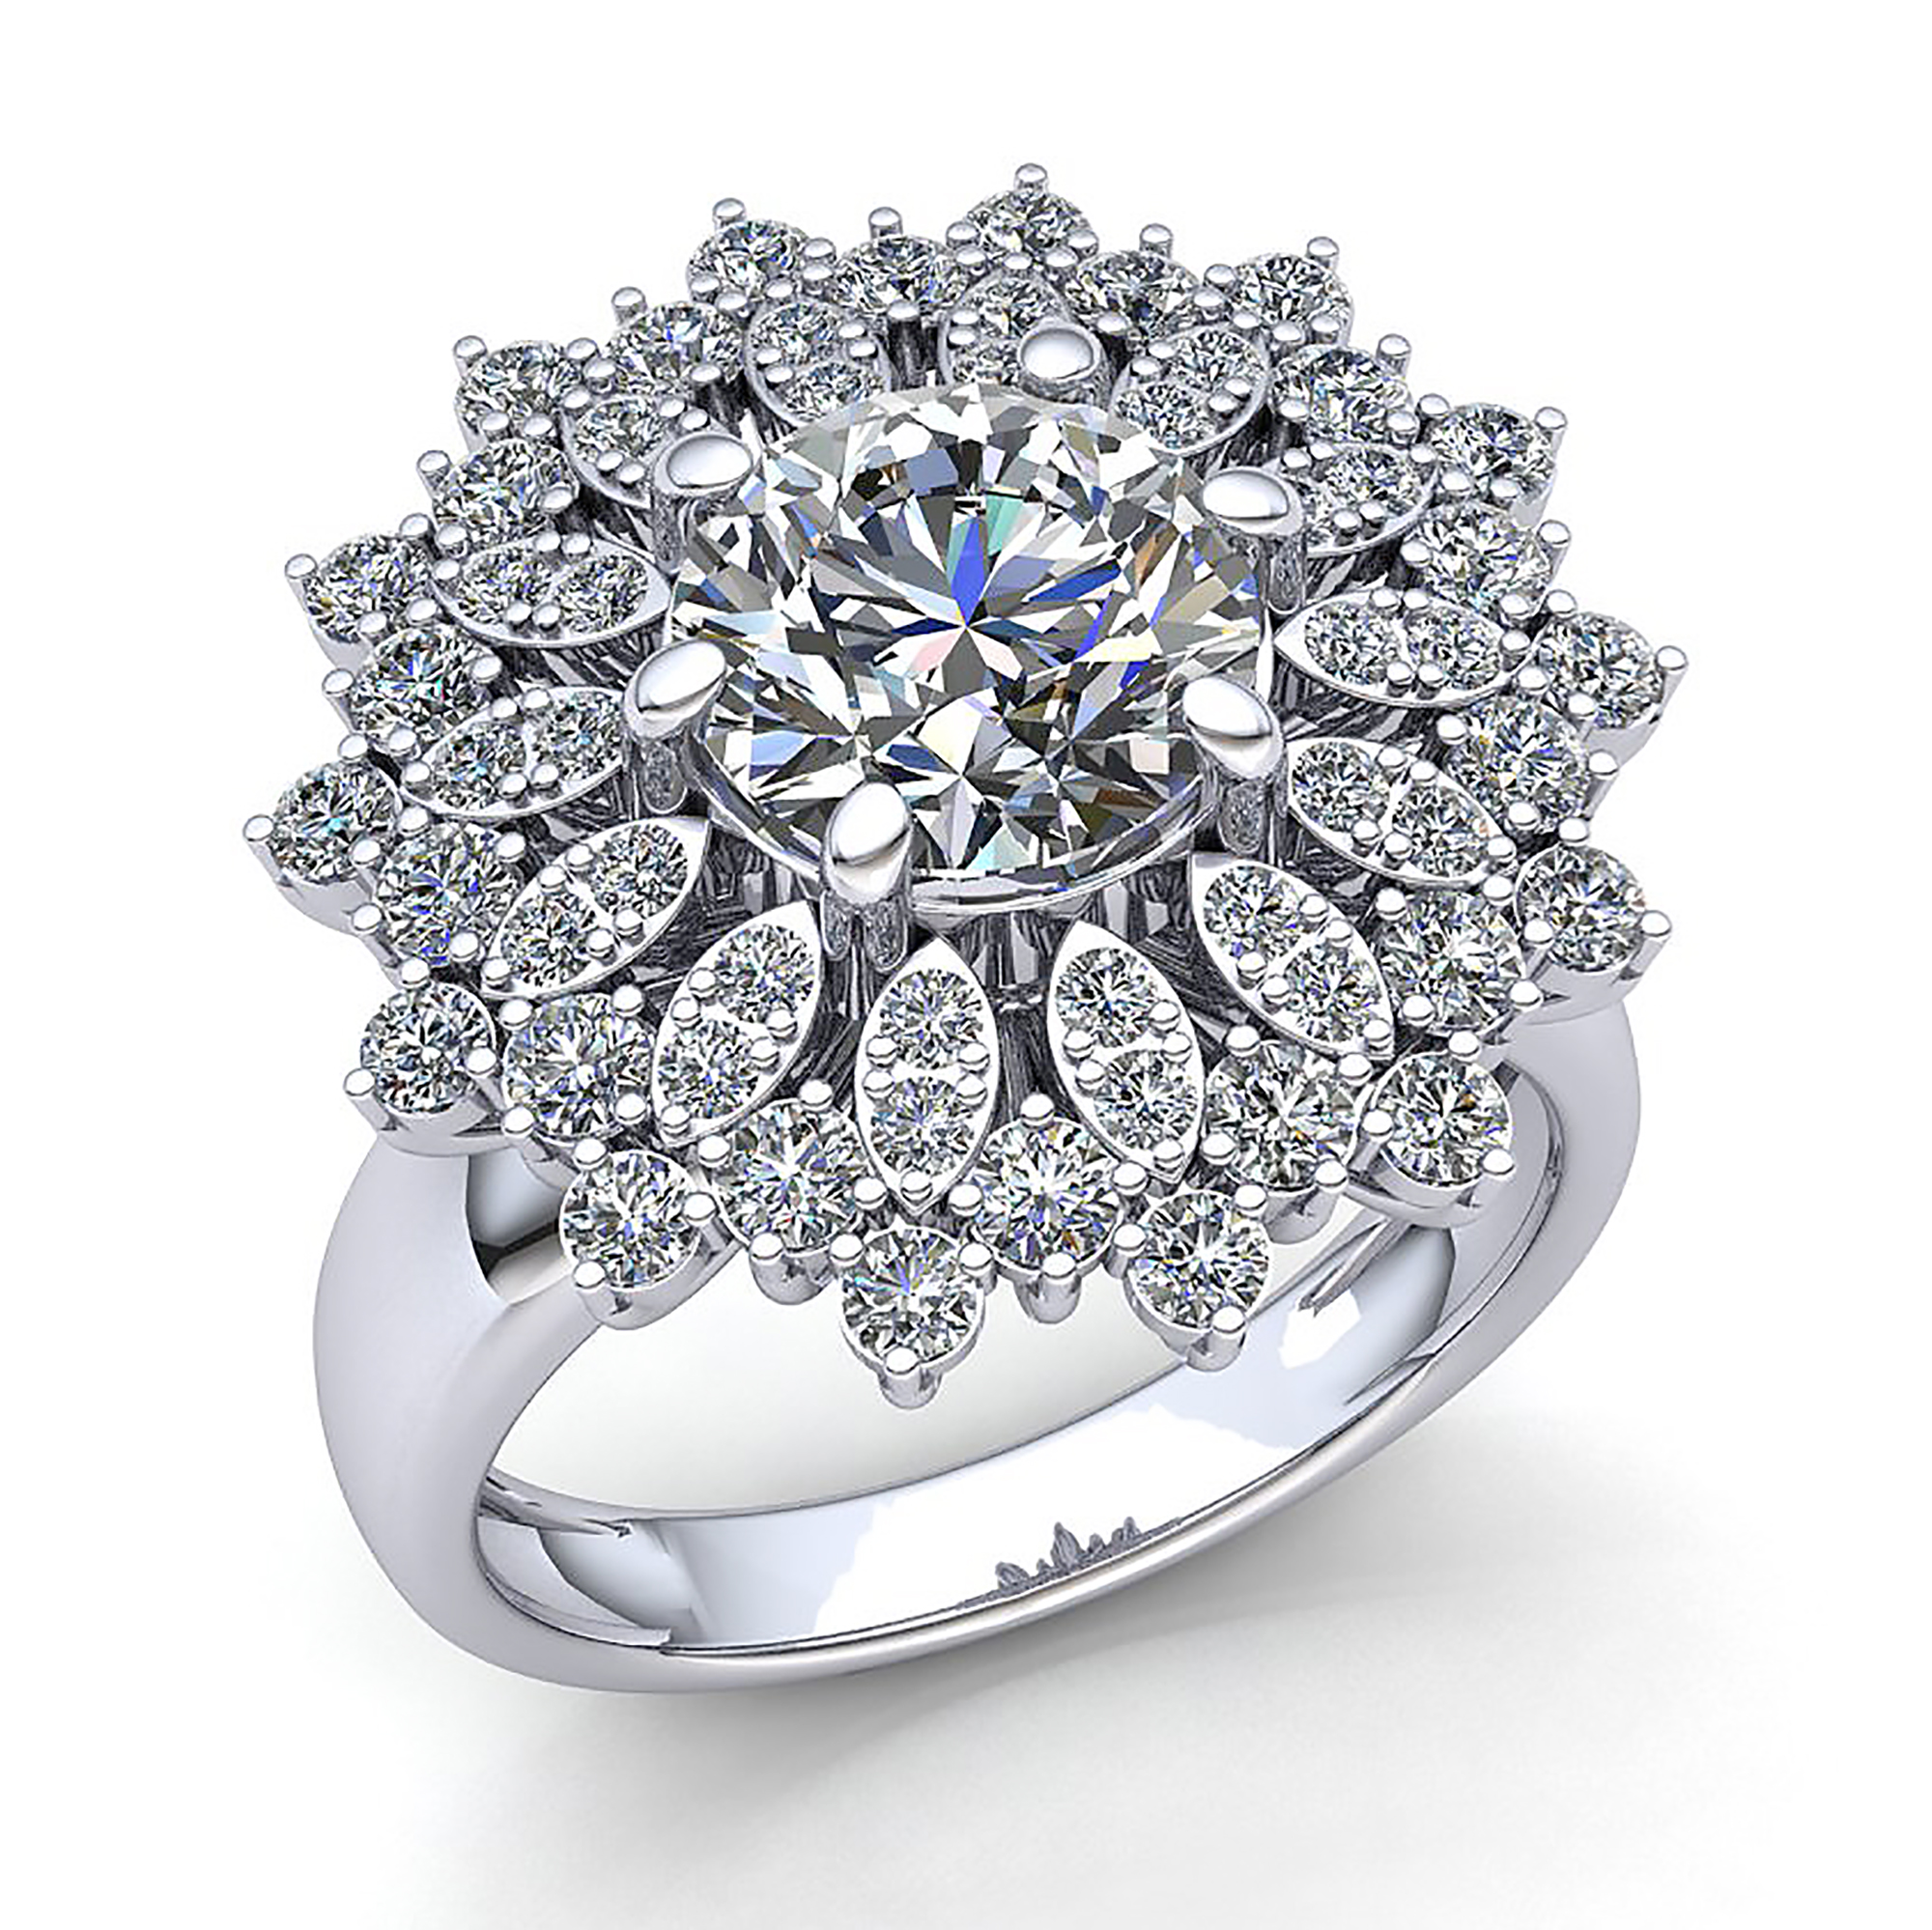 GloryMM Flower Faux Diamond Ring Round Cut Crystal Cocktail Ring Cubic Floral Engagement Finger Ring 